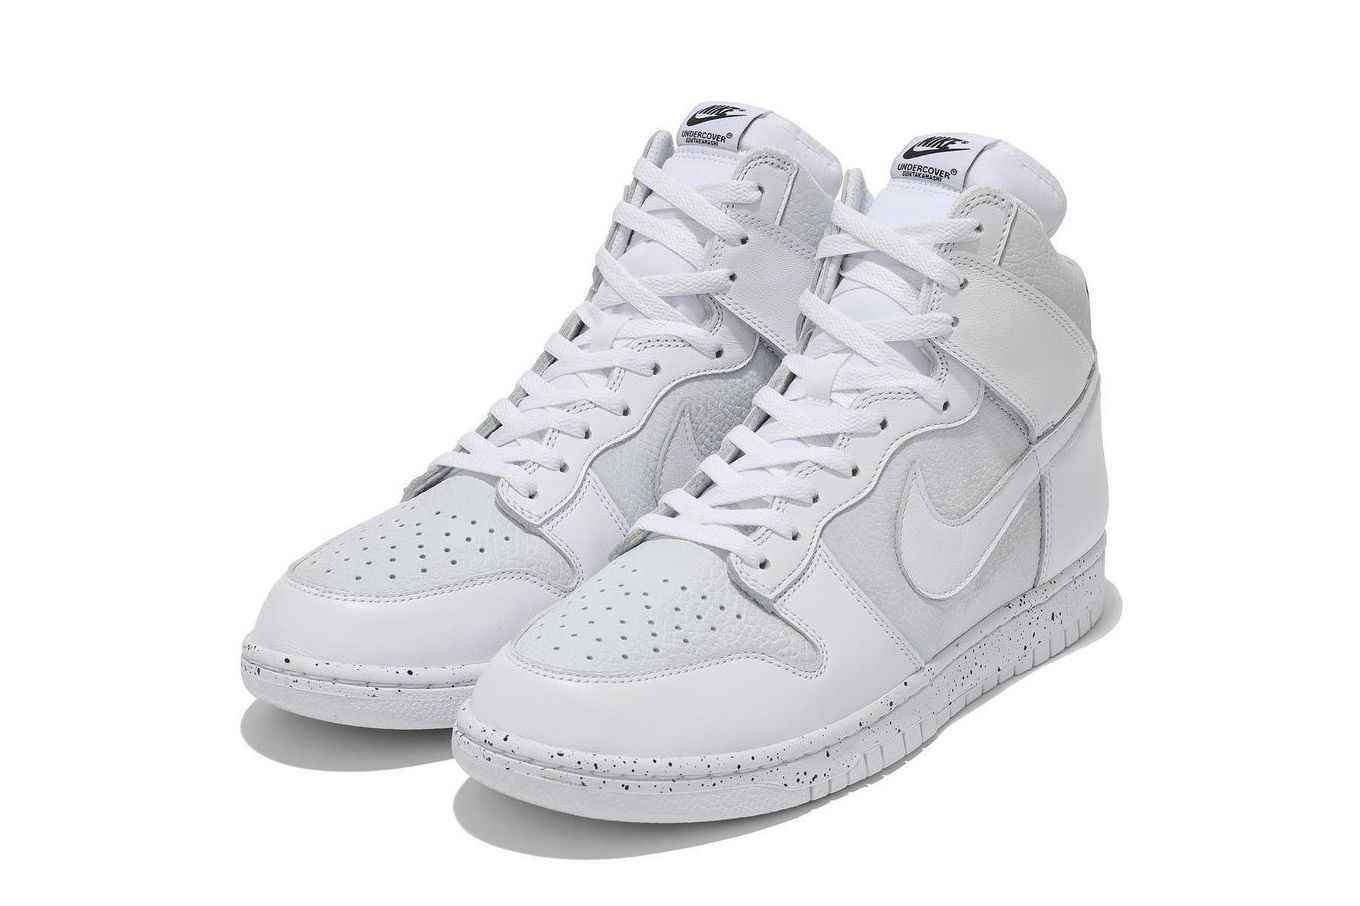 UNDERCOVER x Nike Dunk High 1985 White